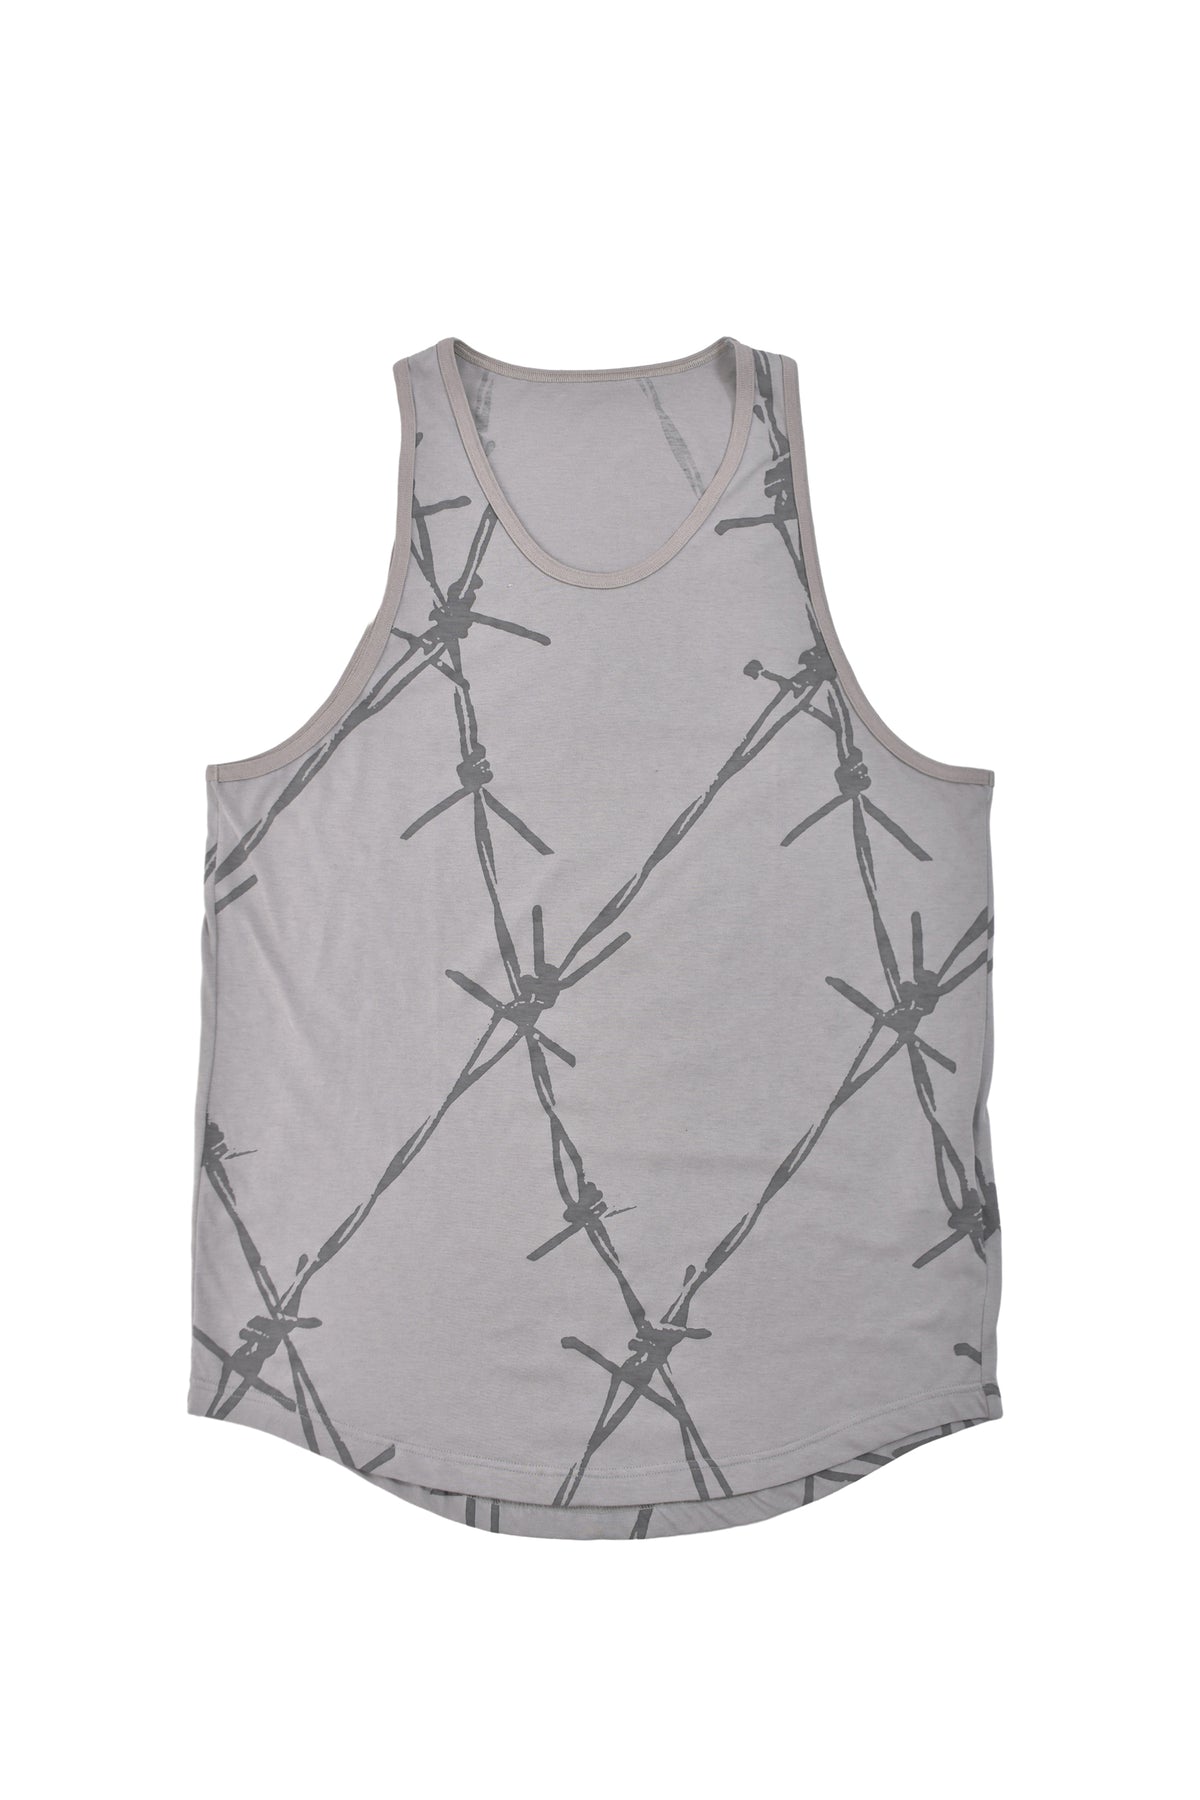 LONG TANK TOP “BARBED WIRE” / G.BLK